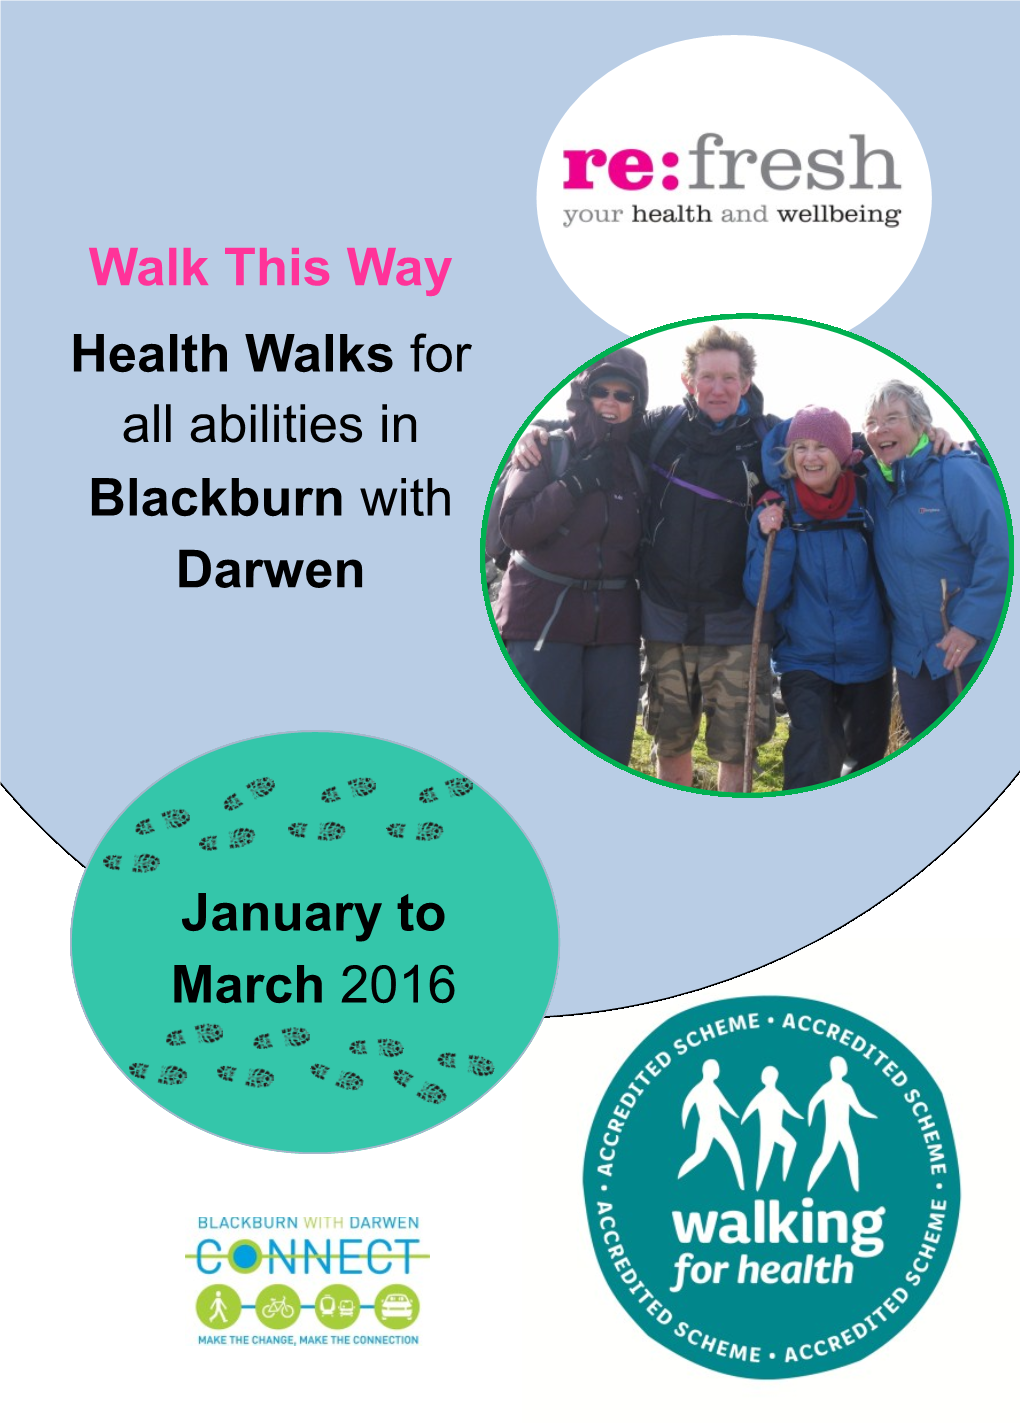 Walk This Way Health Walks for All Abilities in Blackburn with Darwen January to March 2016